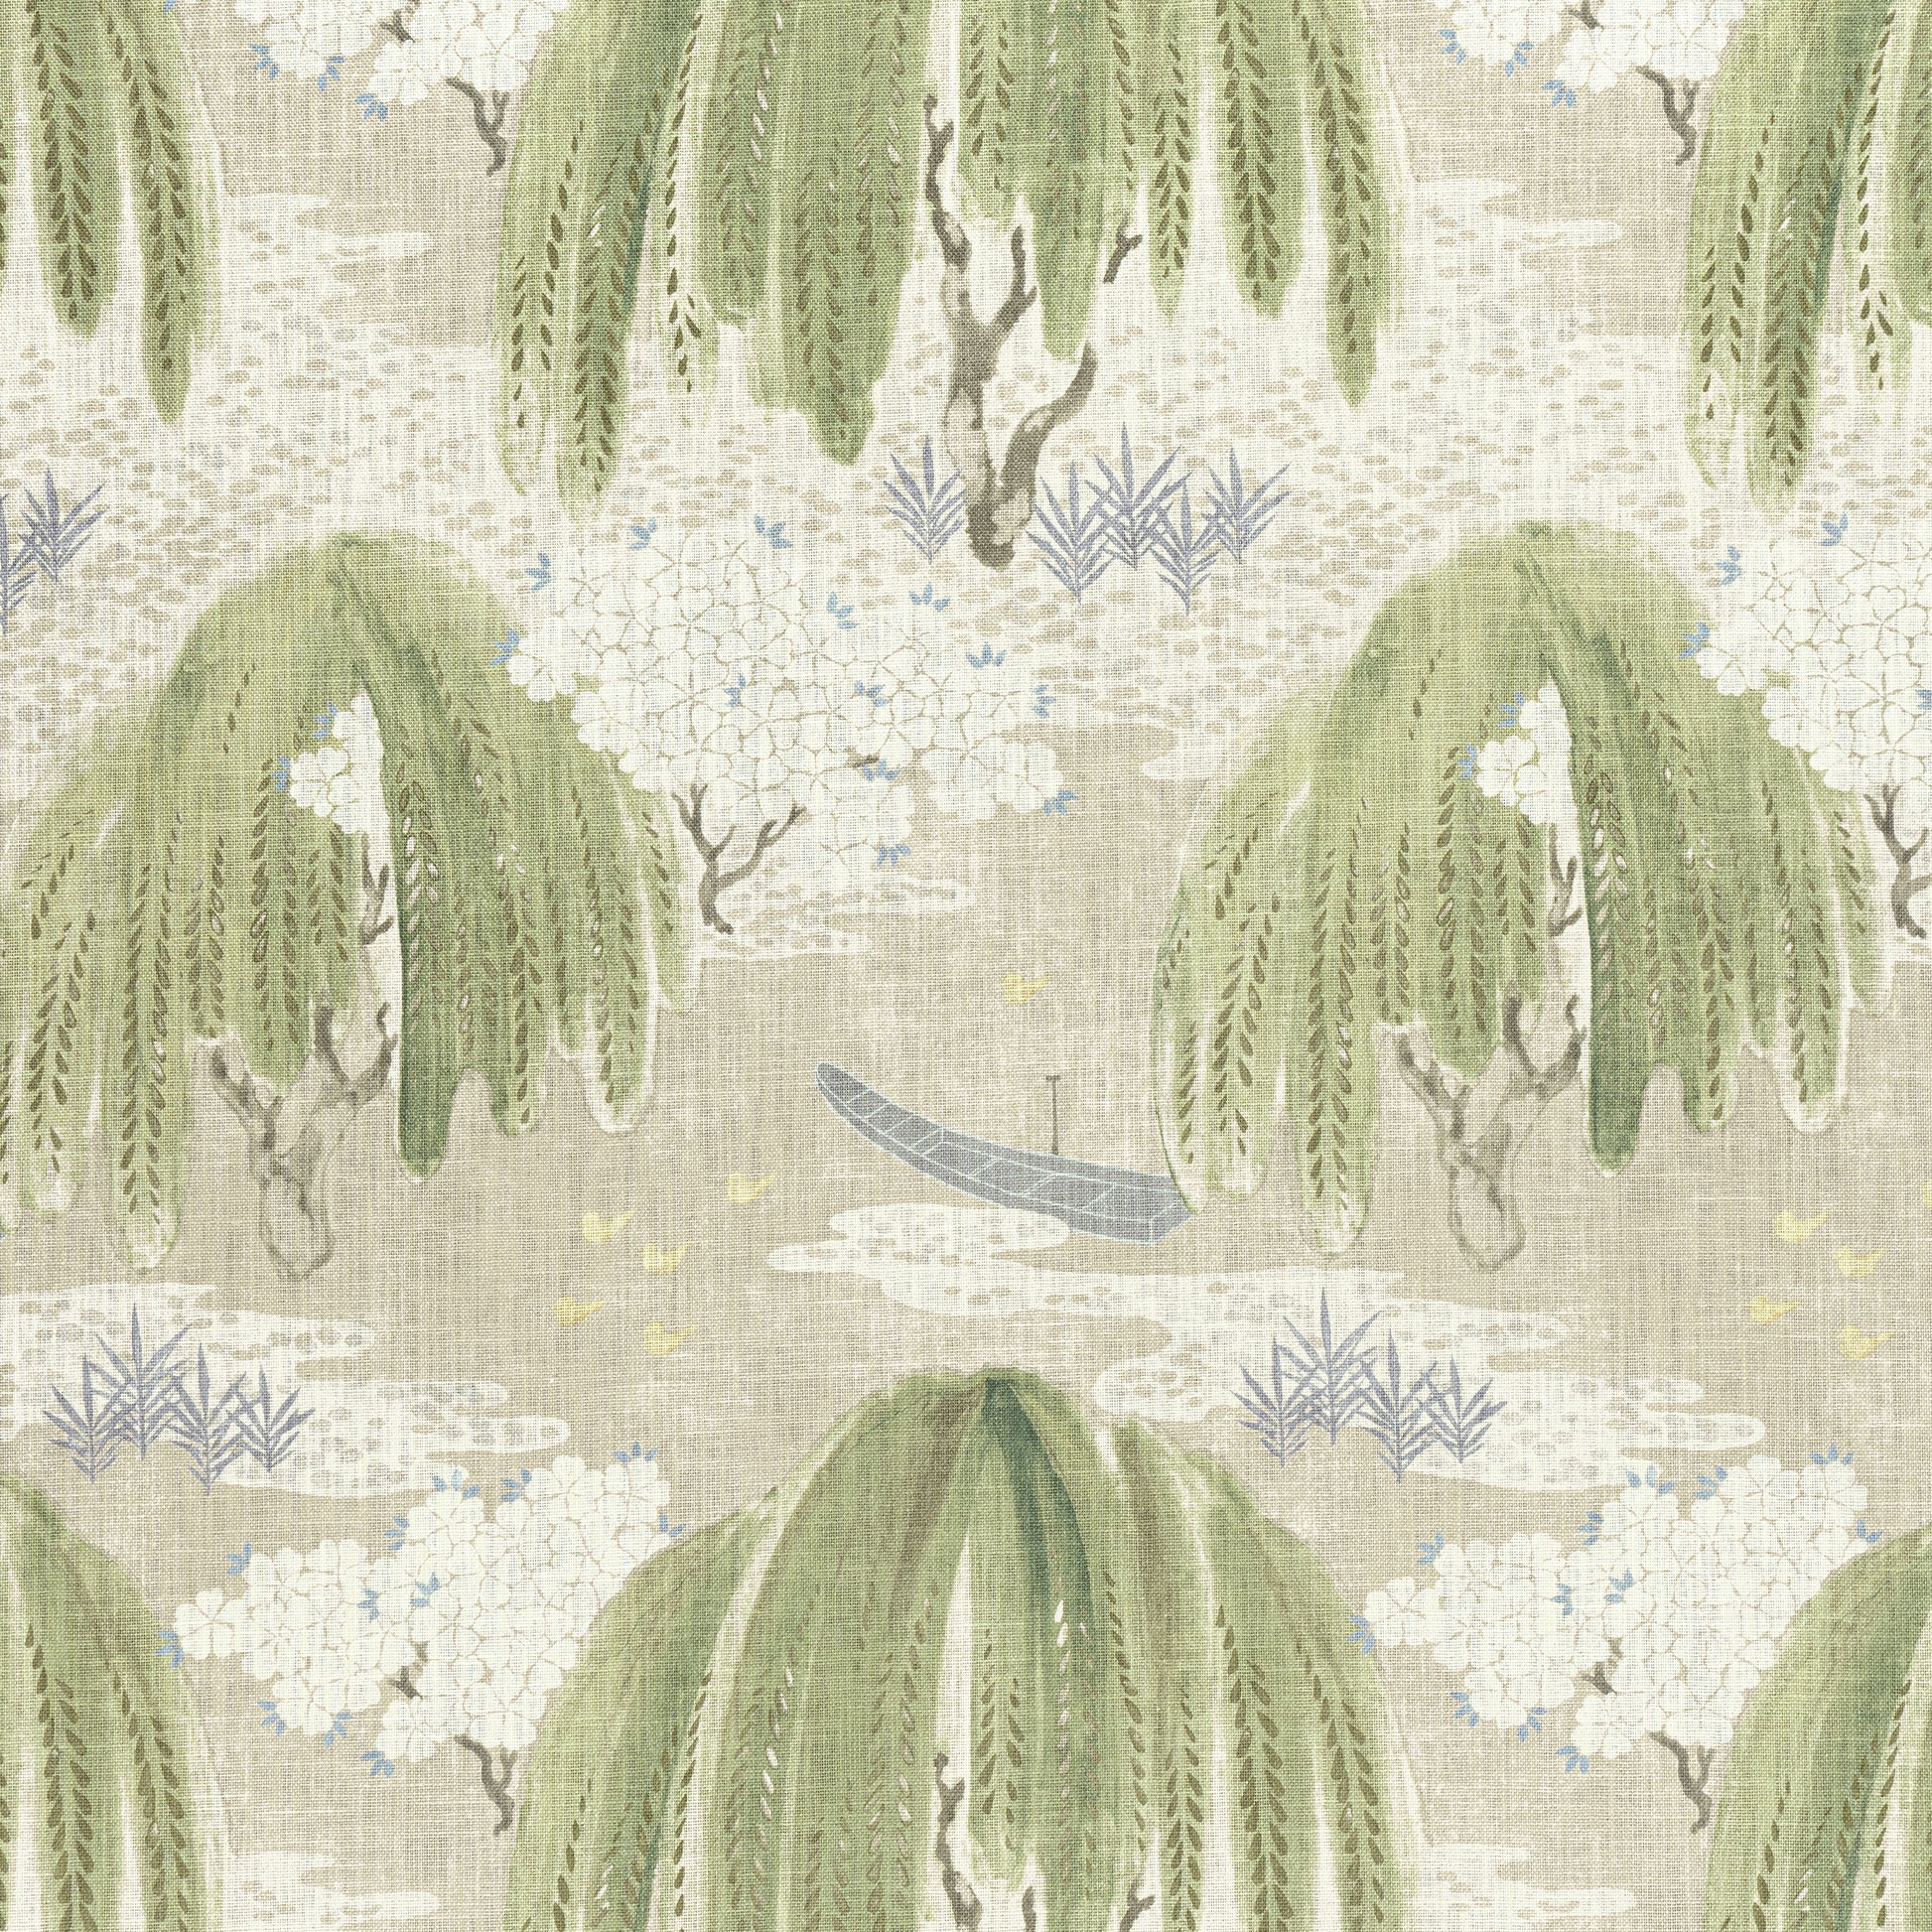 Purchase  Ann French Fabric SKU AF23106  pattern name  Willow Tree